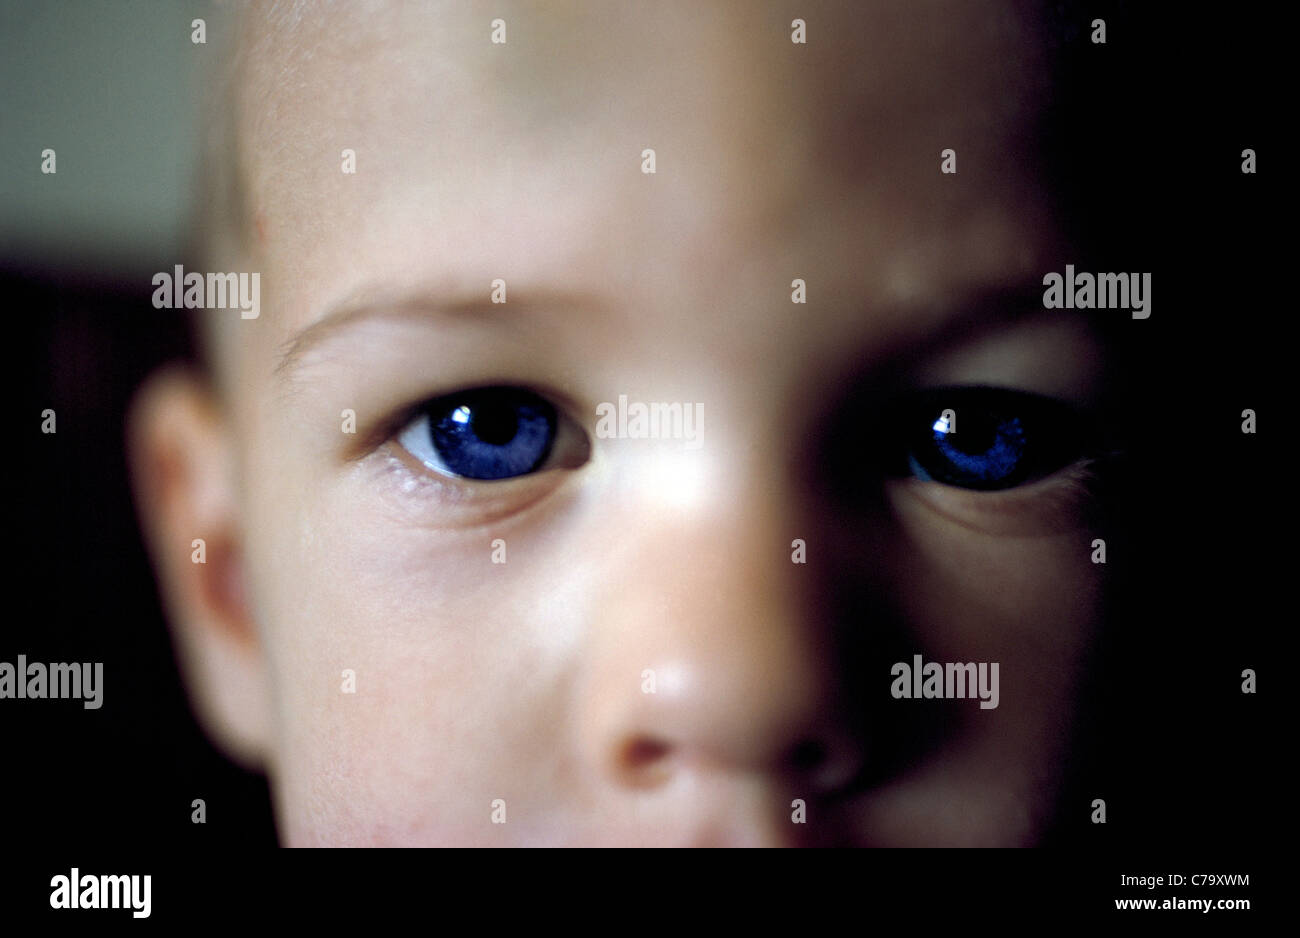 A very young boy with big blue eyes stares at the camera for this extreme close-up portrait that shows his concentration. Stock Photo